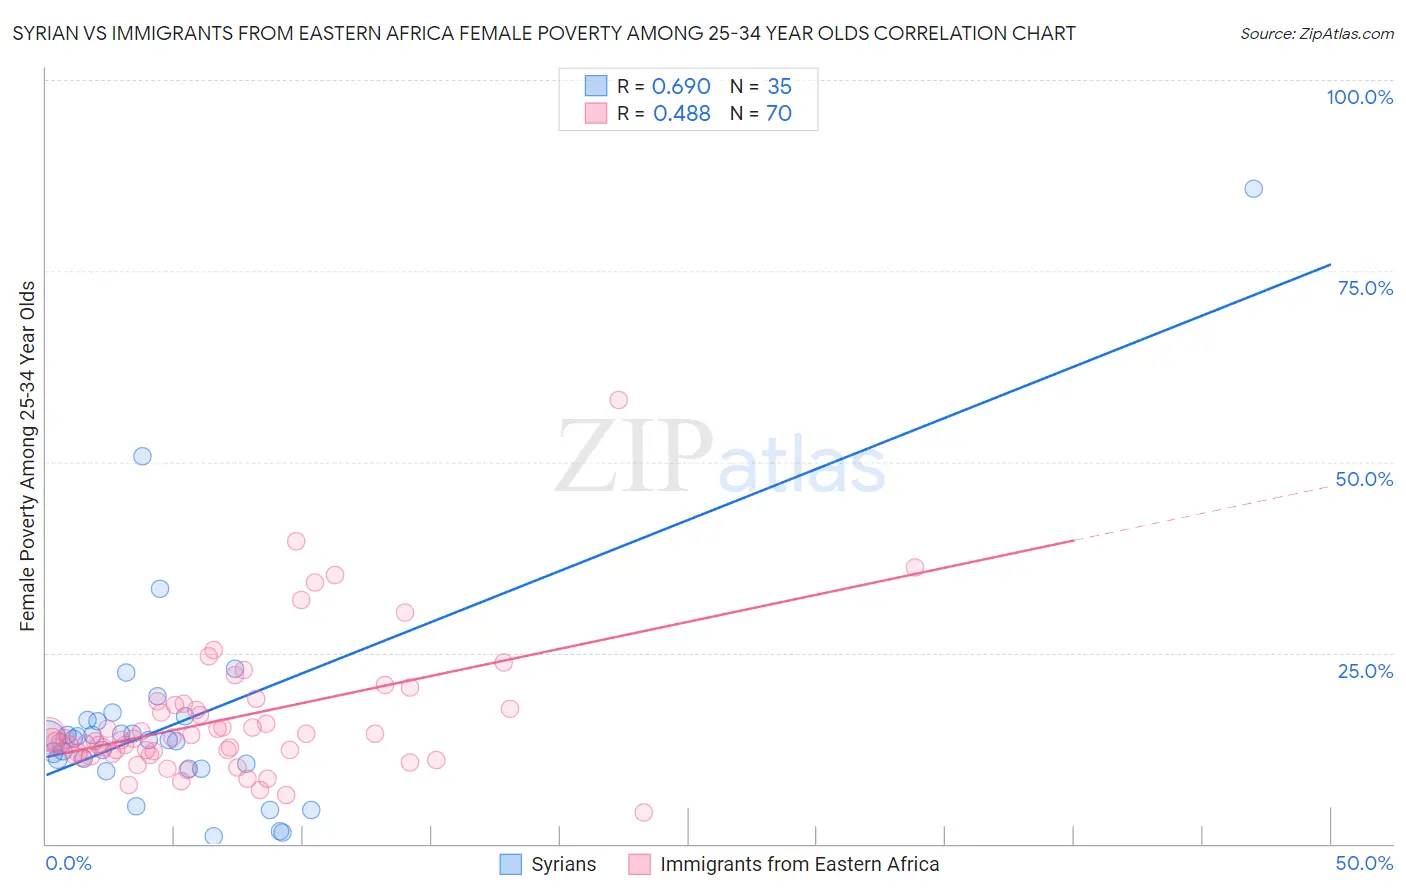 Syrian vs Immigrants from Eastern Africa Female Poverty Among 25-34 Year Olds